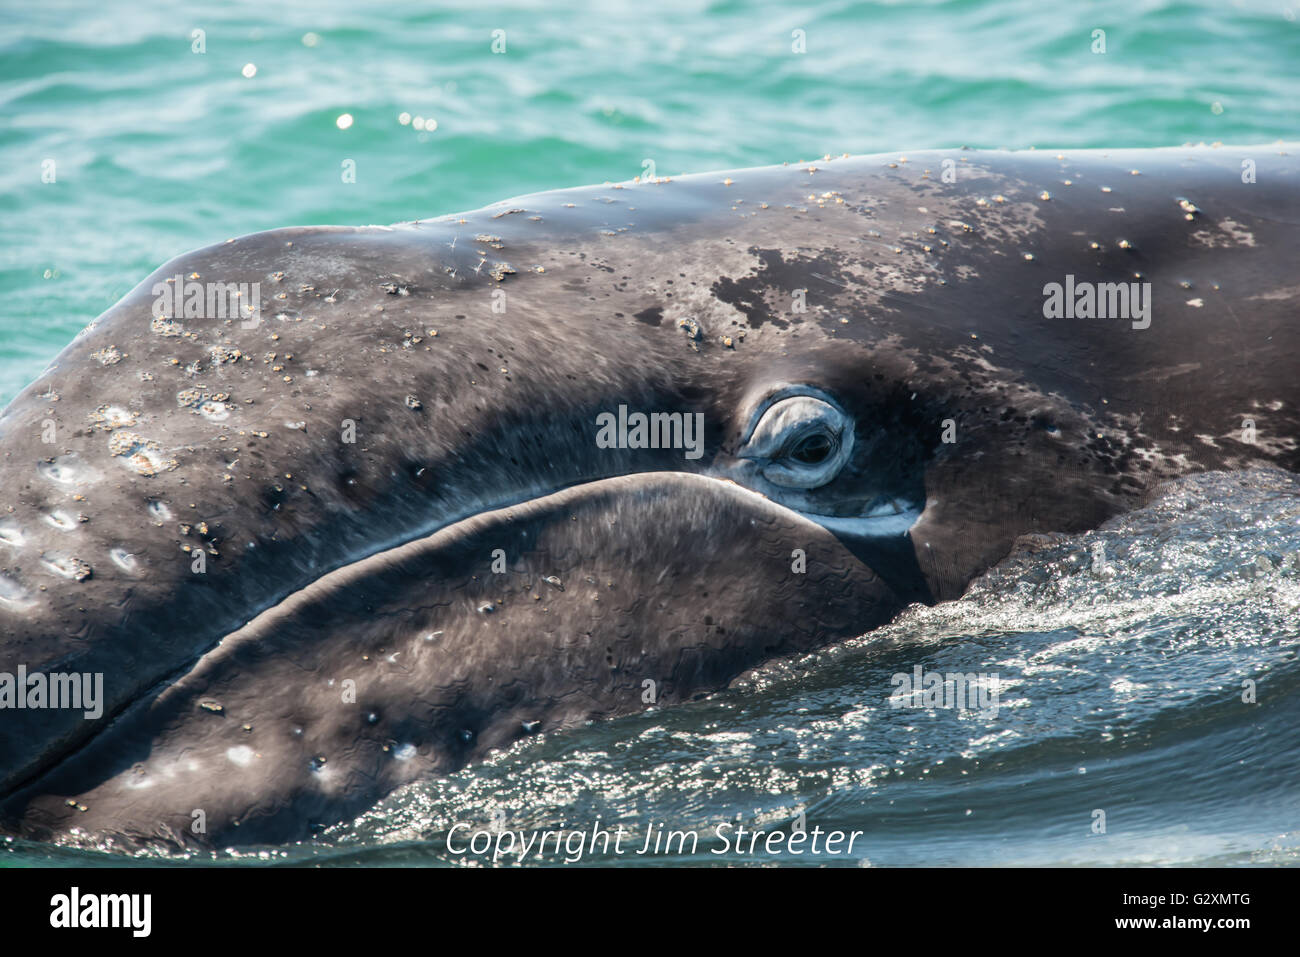 A young Gray Whale calf swims with its eye open in the Pacific Ocean off Baja, Mexico. Stock Photo